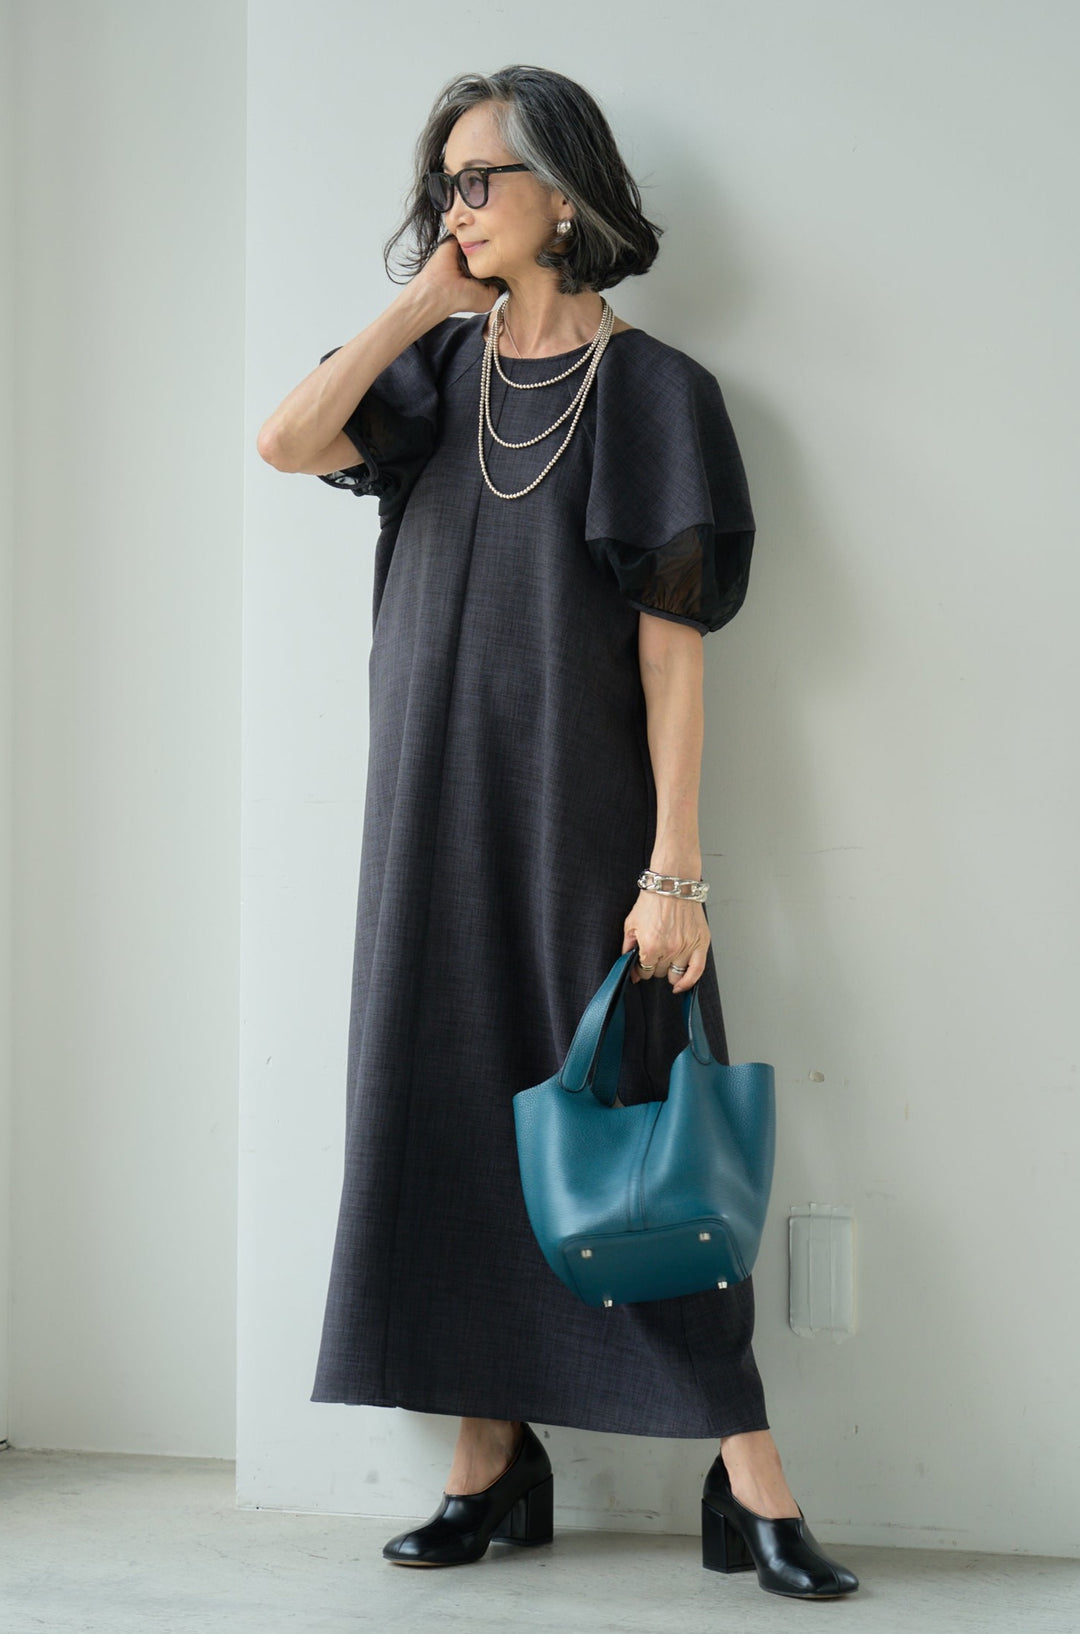 Linen-like dress with sheer sleeves